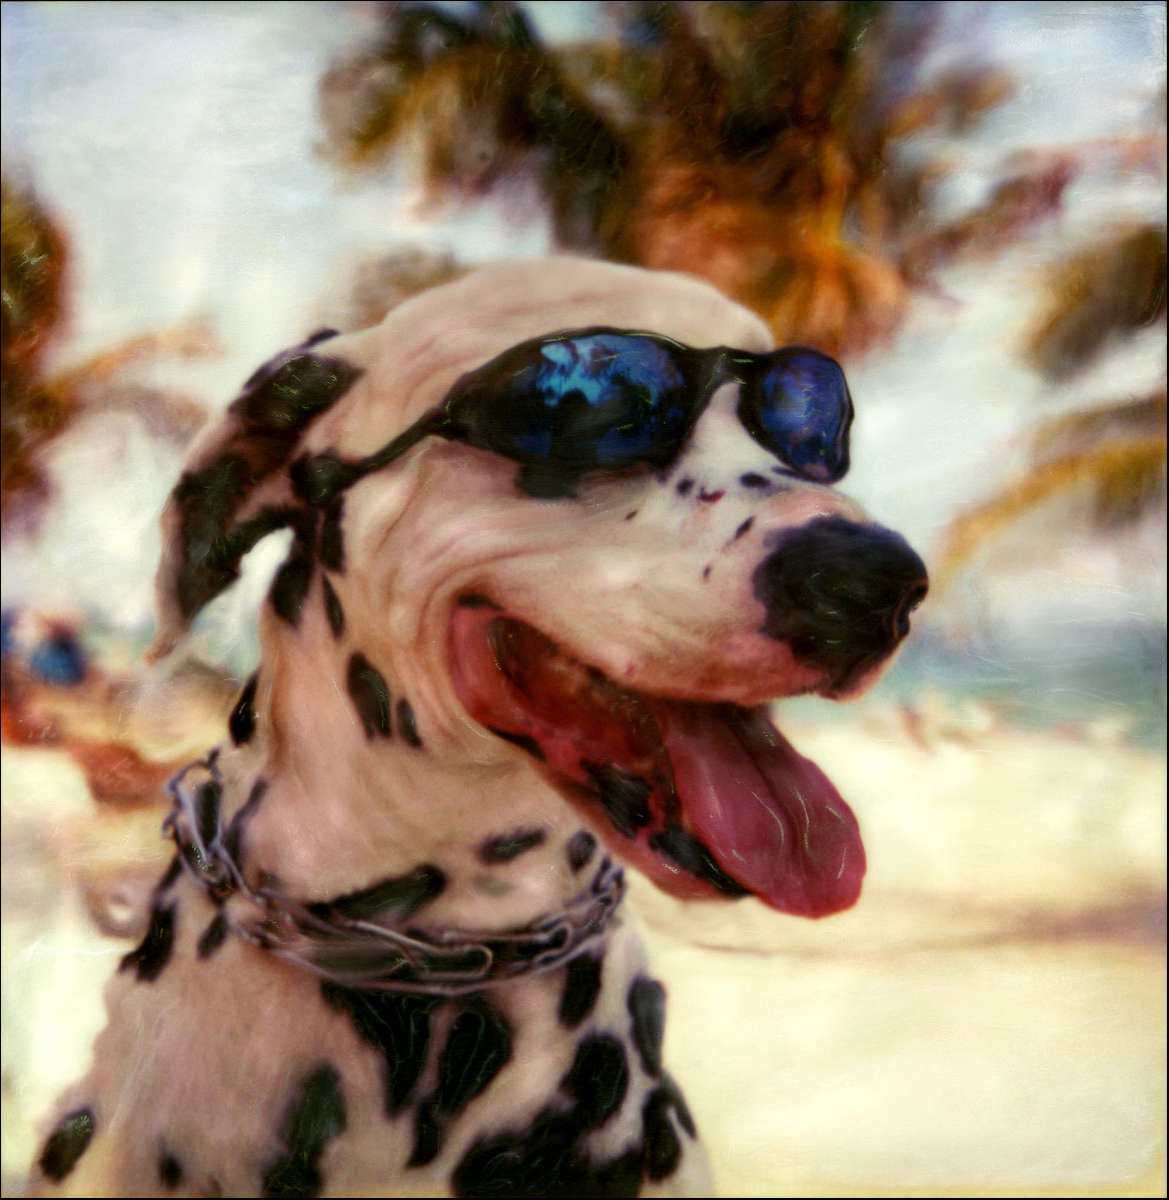 "Spot on Beach"<br> Dalmation with Sunglasses on Ft Lauderdale Beach, FL